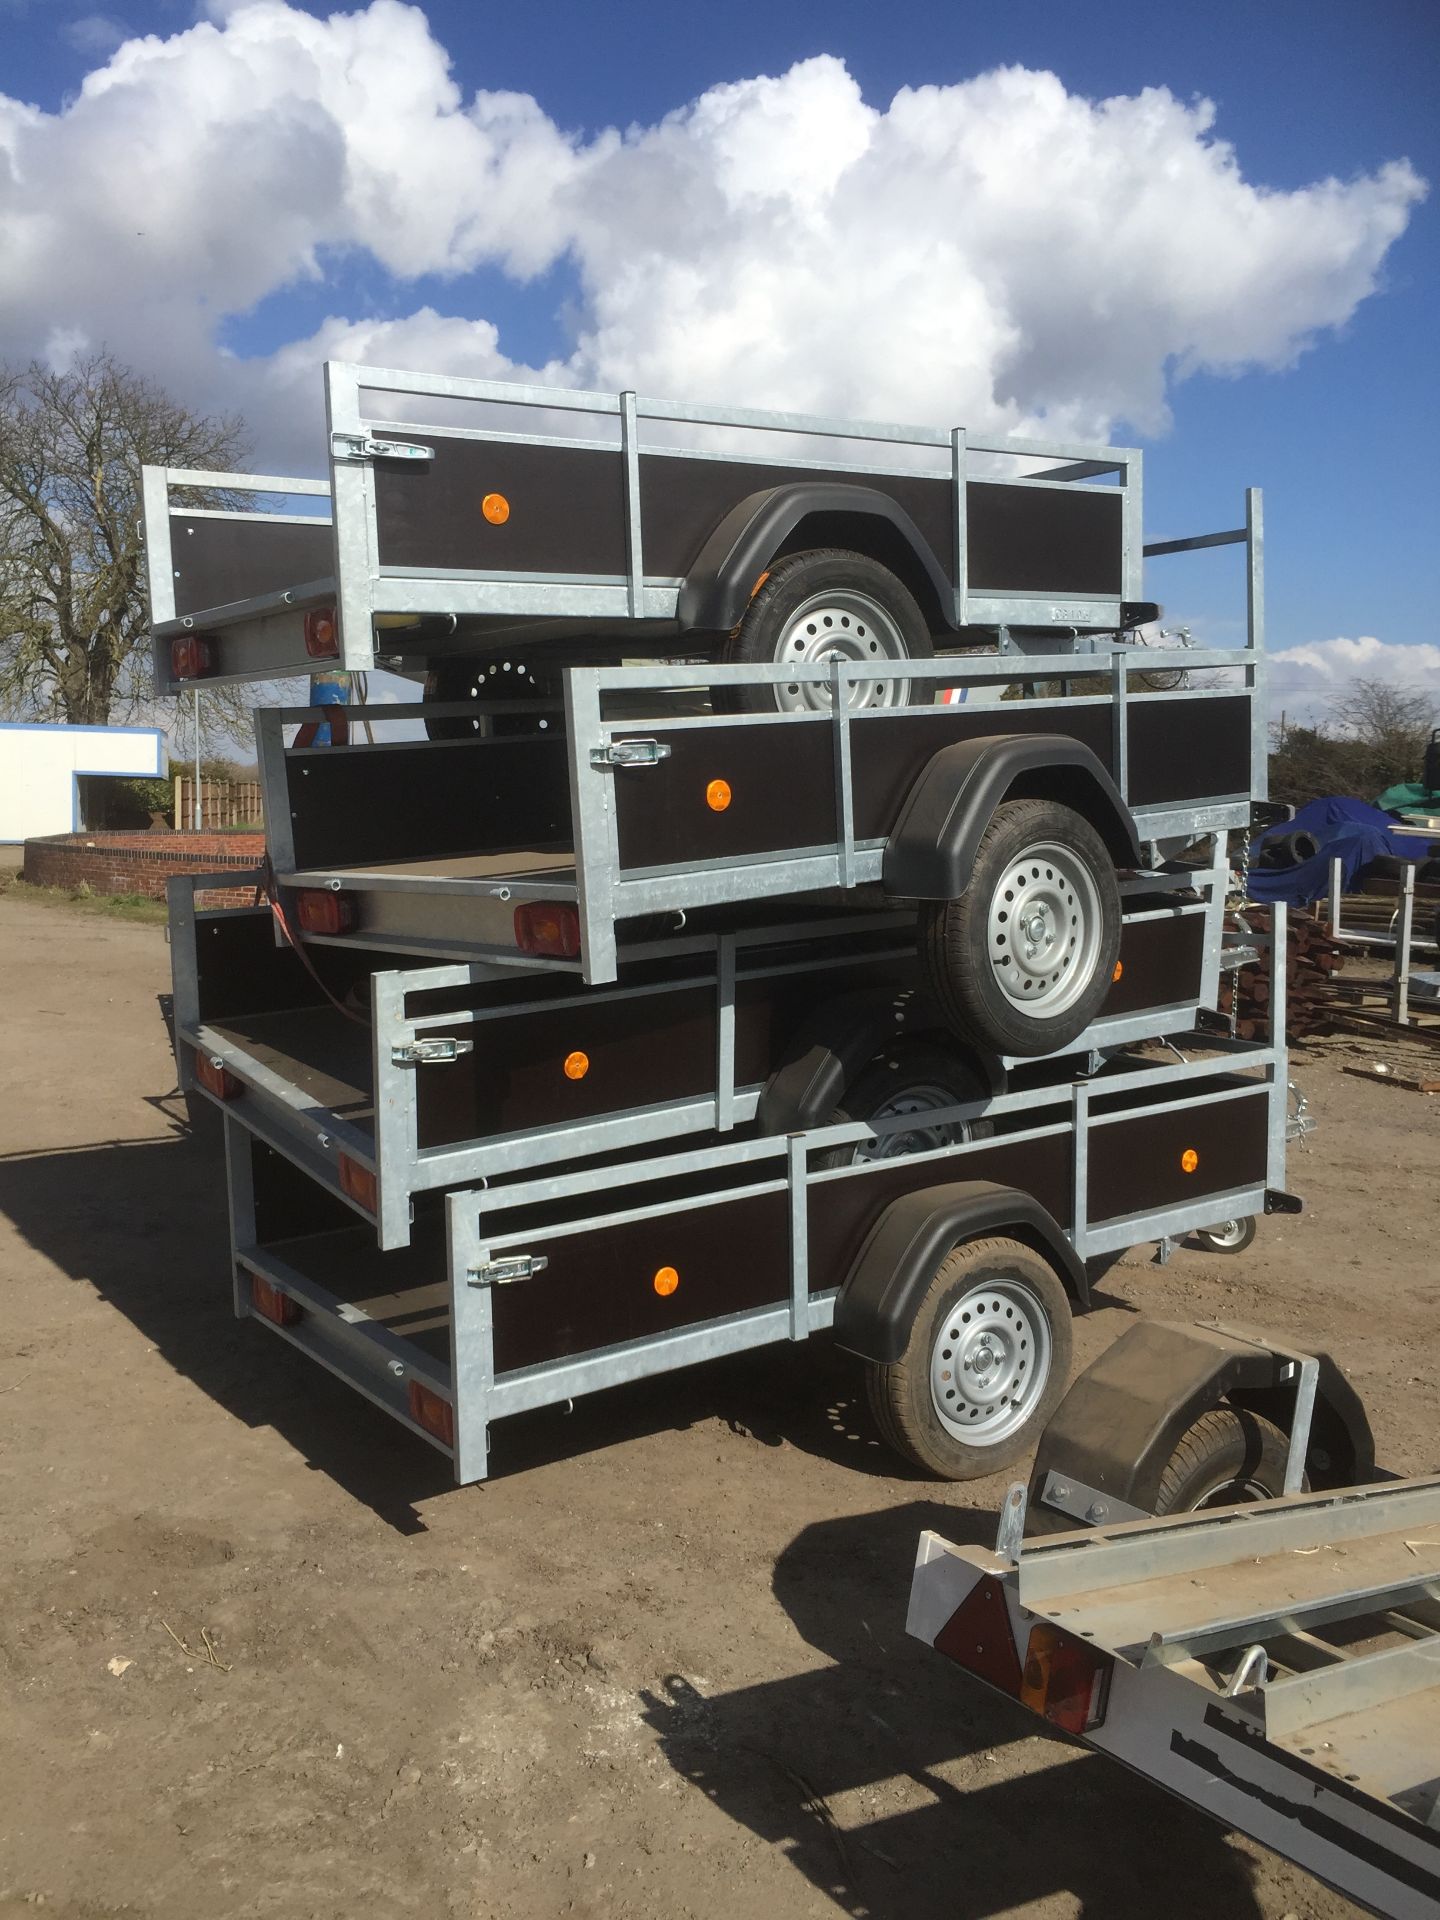 Brand New 7ft 4” trailer with drop down tail gates and hard wired lighting. Acorn Trailer, full